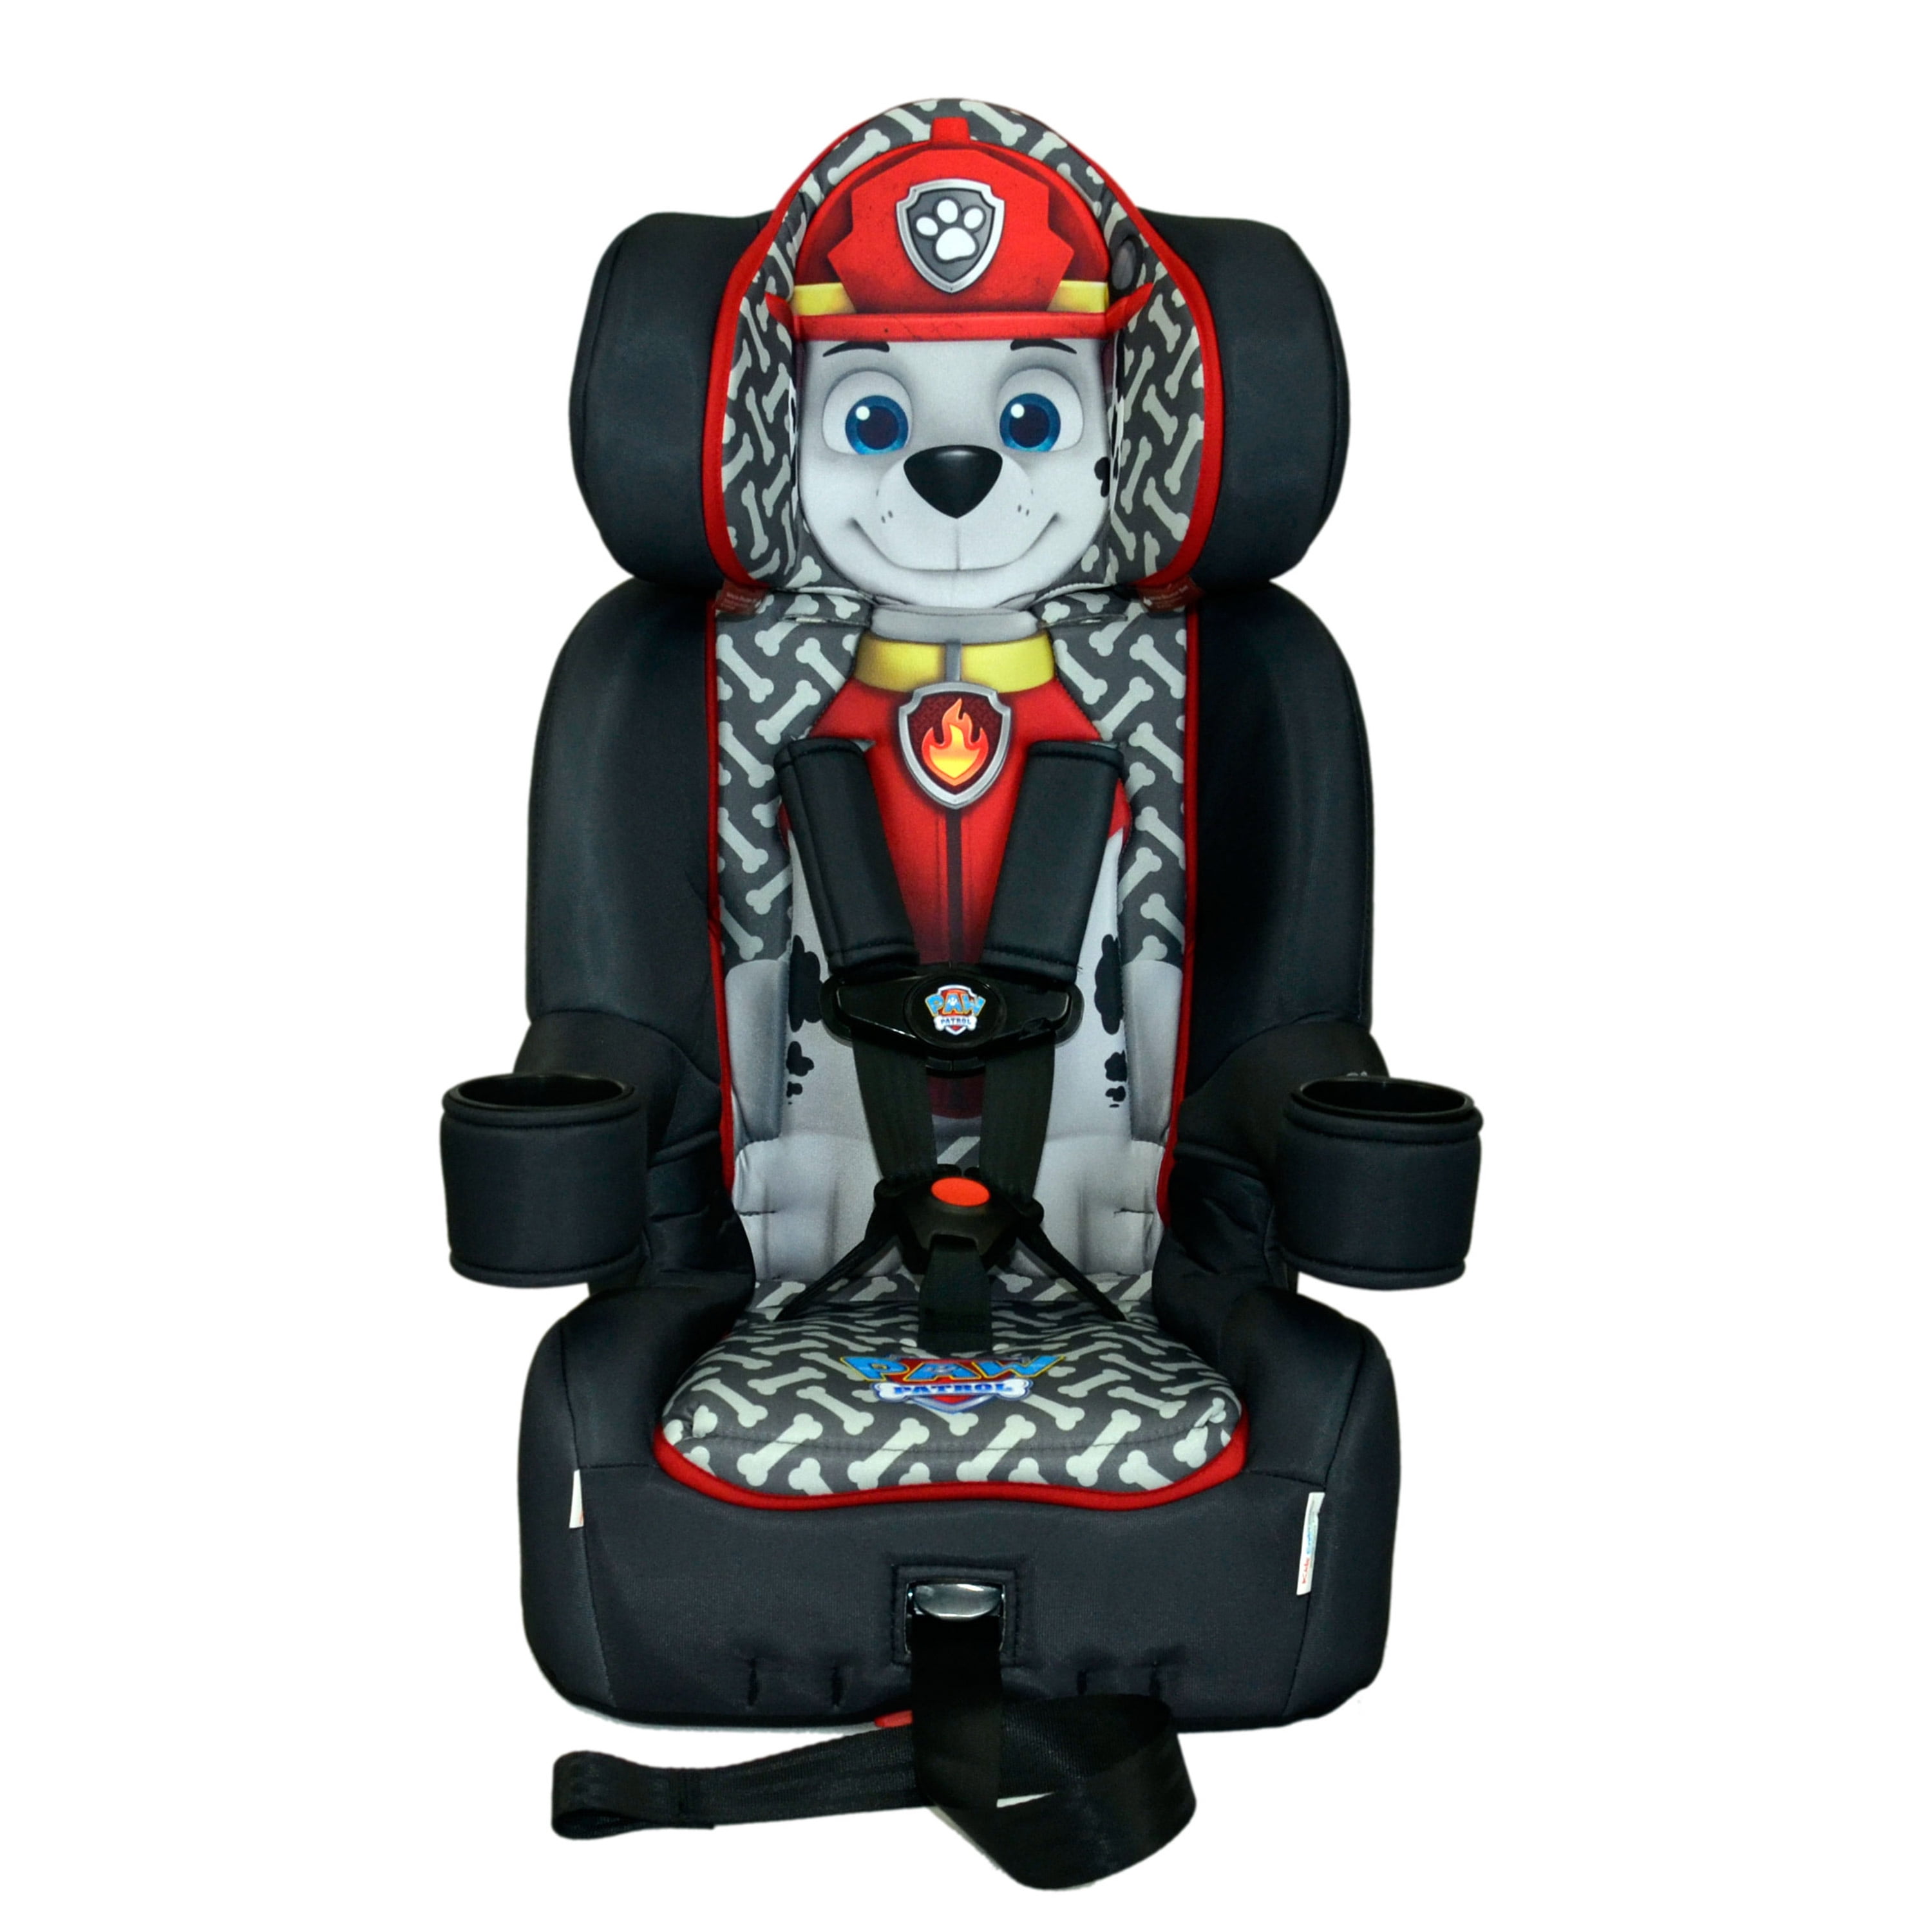 The First Years 3 in 1 Booster Seat Nickelodeon Paw Patrol 